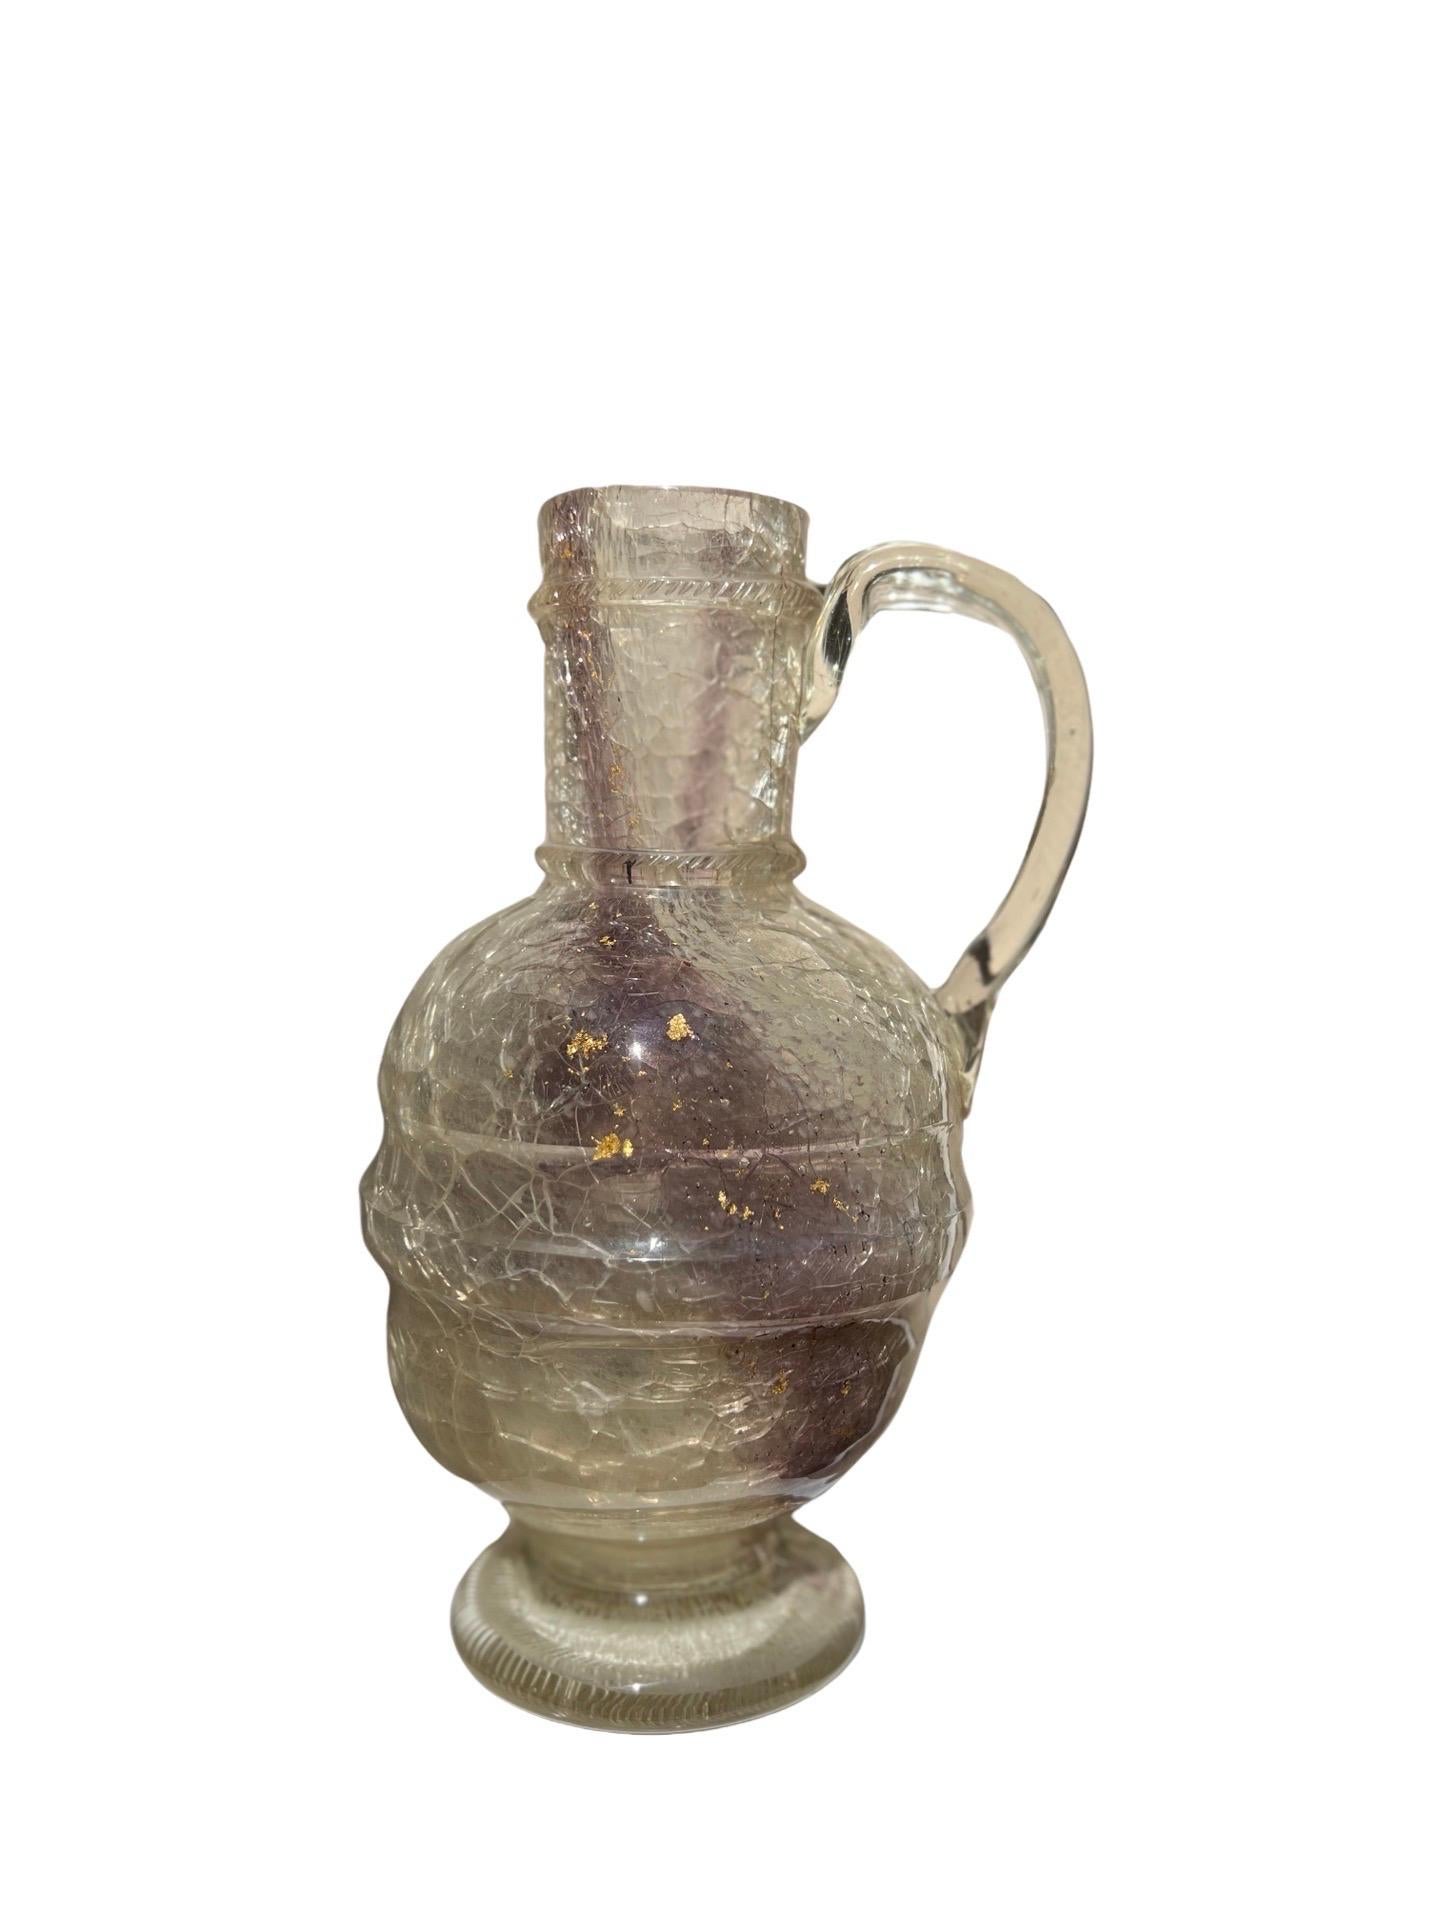 After The Roman Antique - Rock Crystal, Glass & Gold Flecking Grand Tour Pitcher For Sale 2